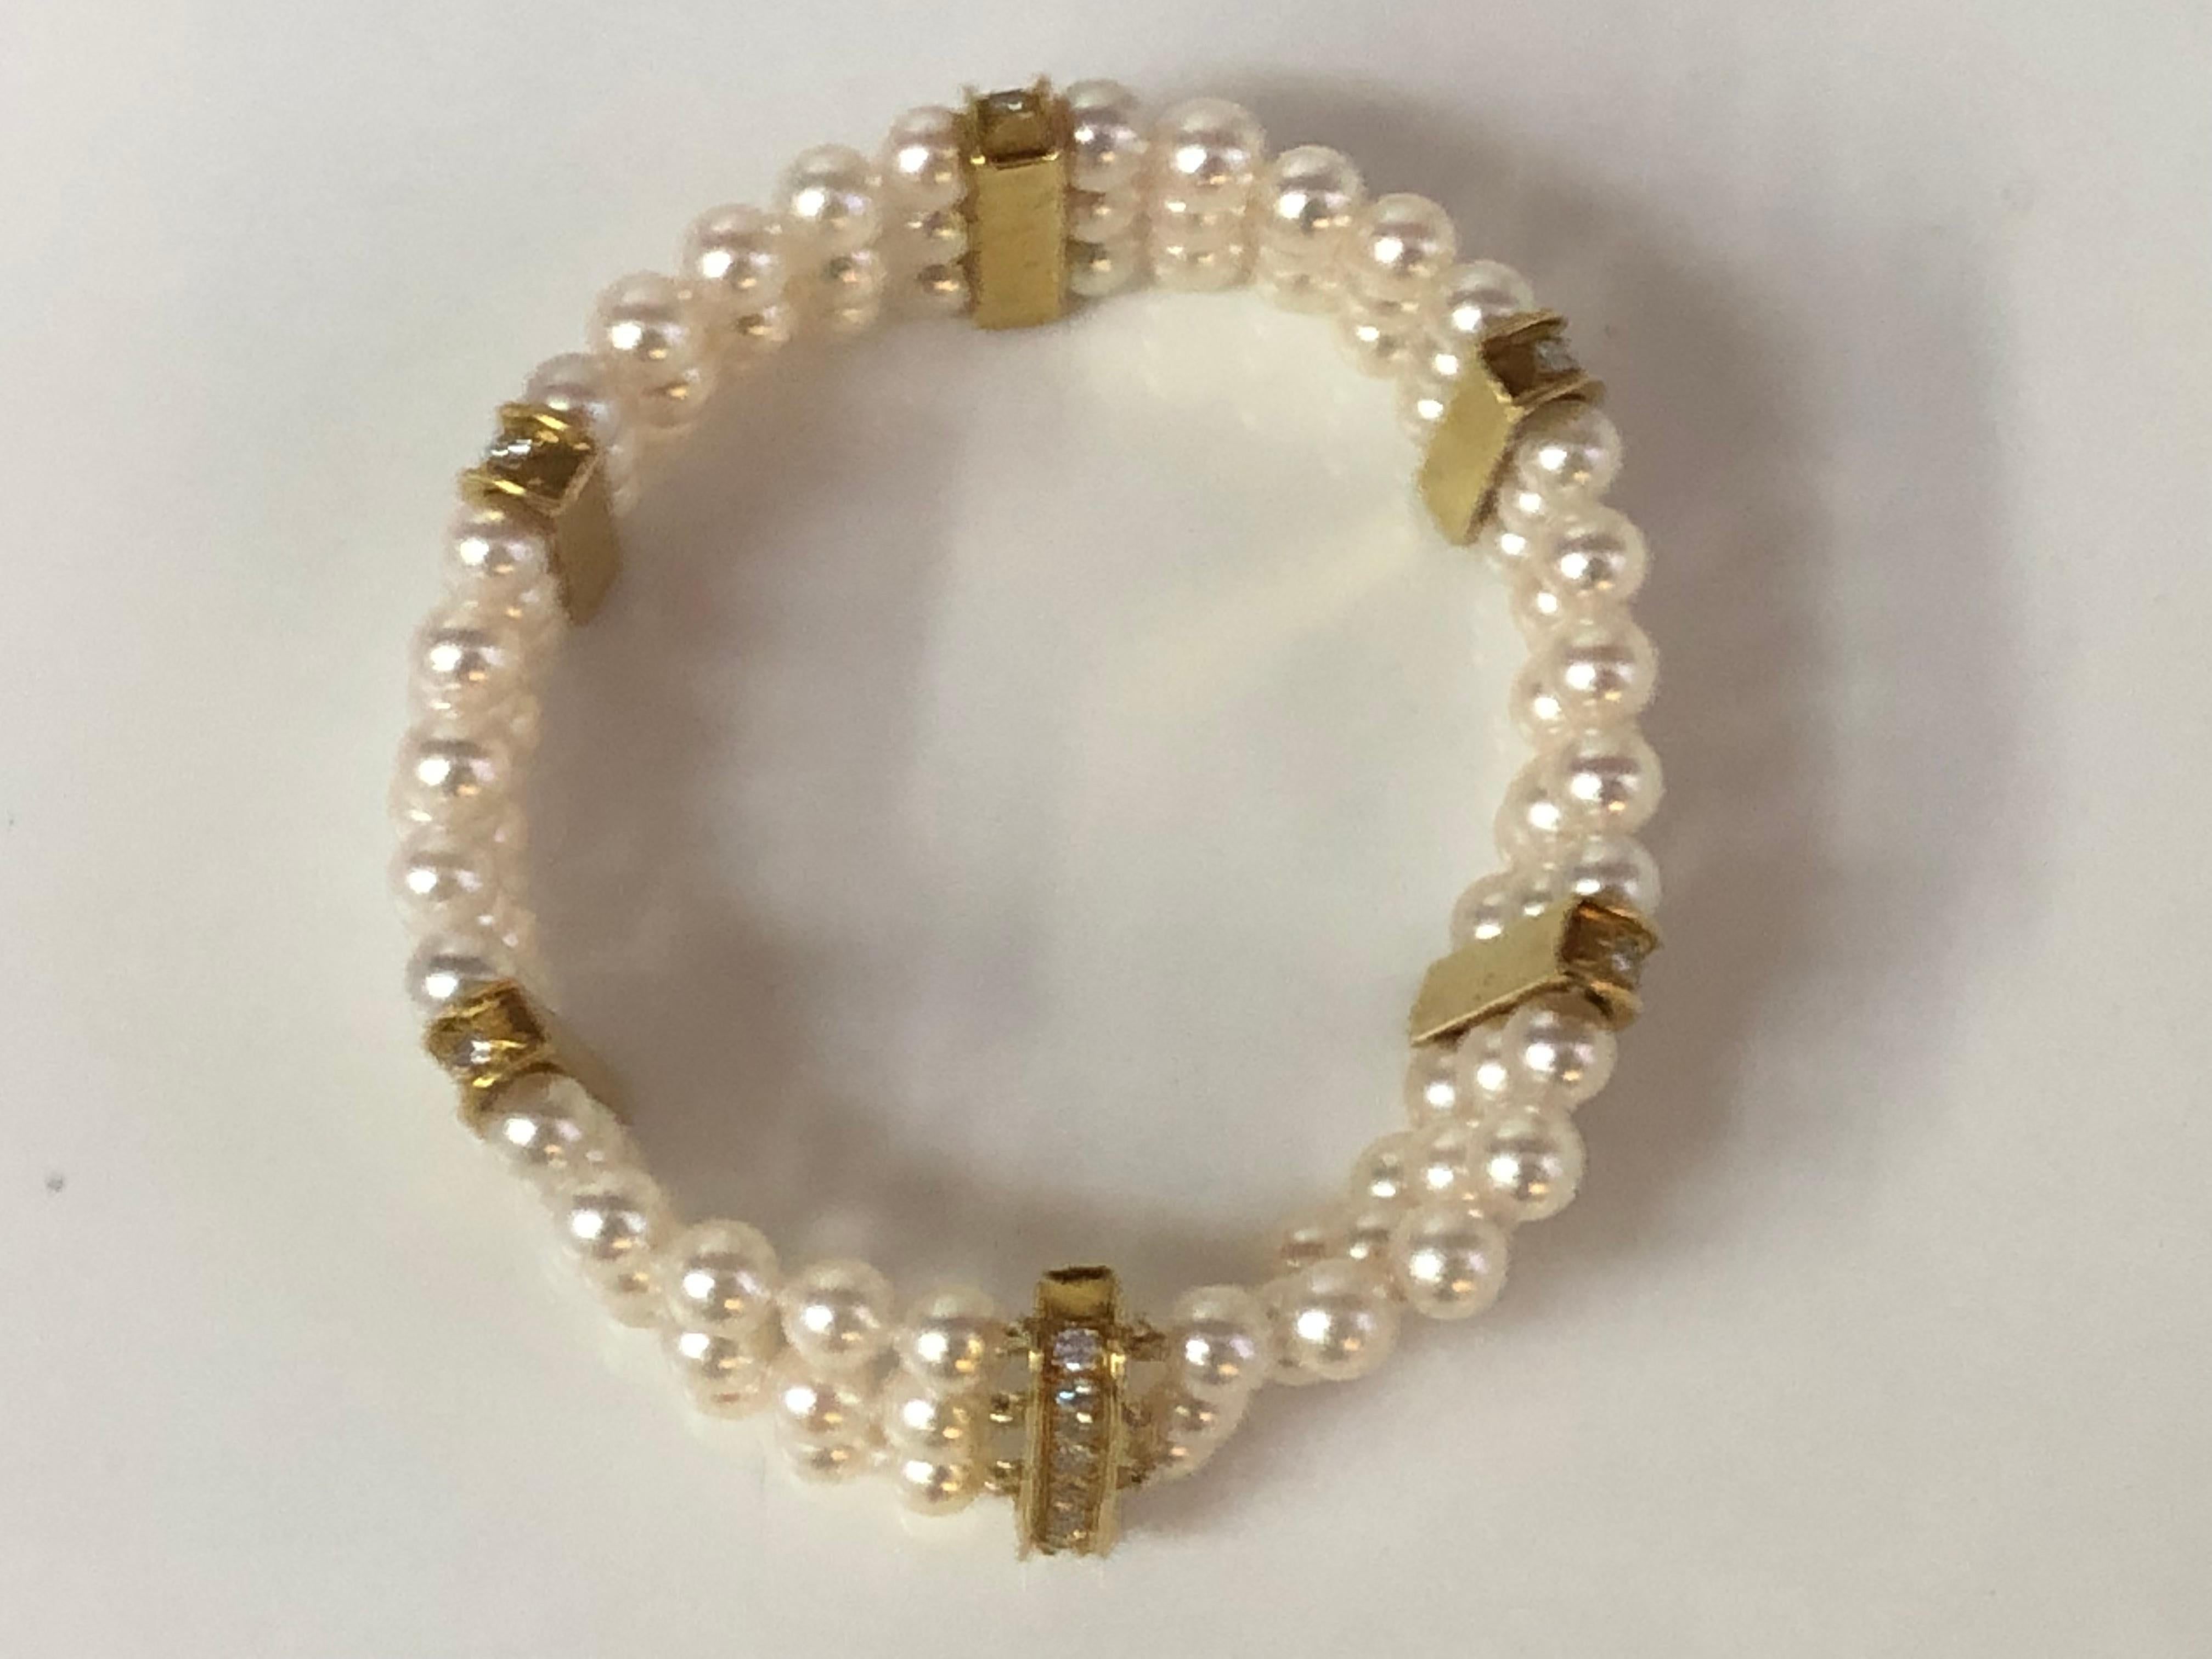 This stunning three strand pearl bracelet with six diamond stations is beautifully classic.
18 karat yellow gold clasp and diamond stations.
6 diamond stations approximately 18.5mm x 4.2mm overall, one is a hidden slide clasp.
48 round diamonds, 8